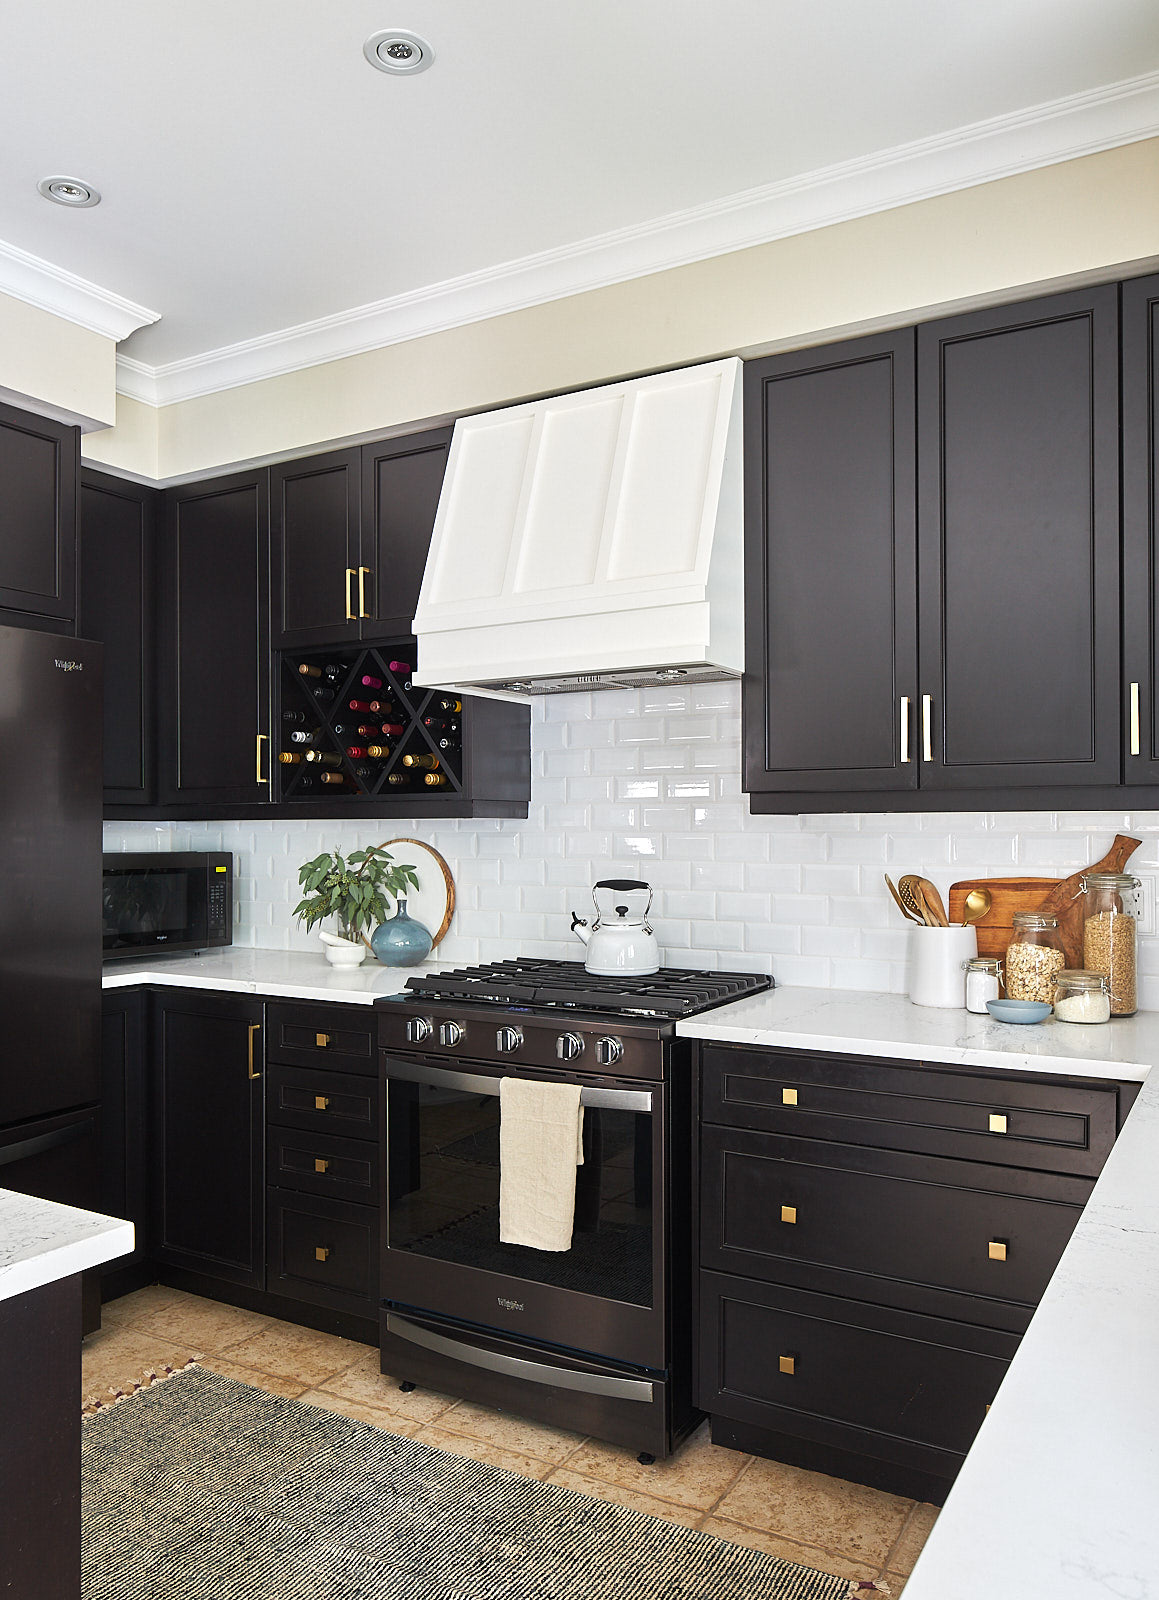 black stainless appliances whirlpool